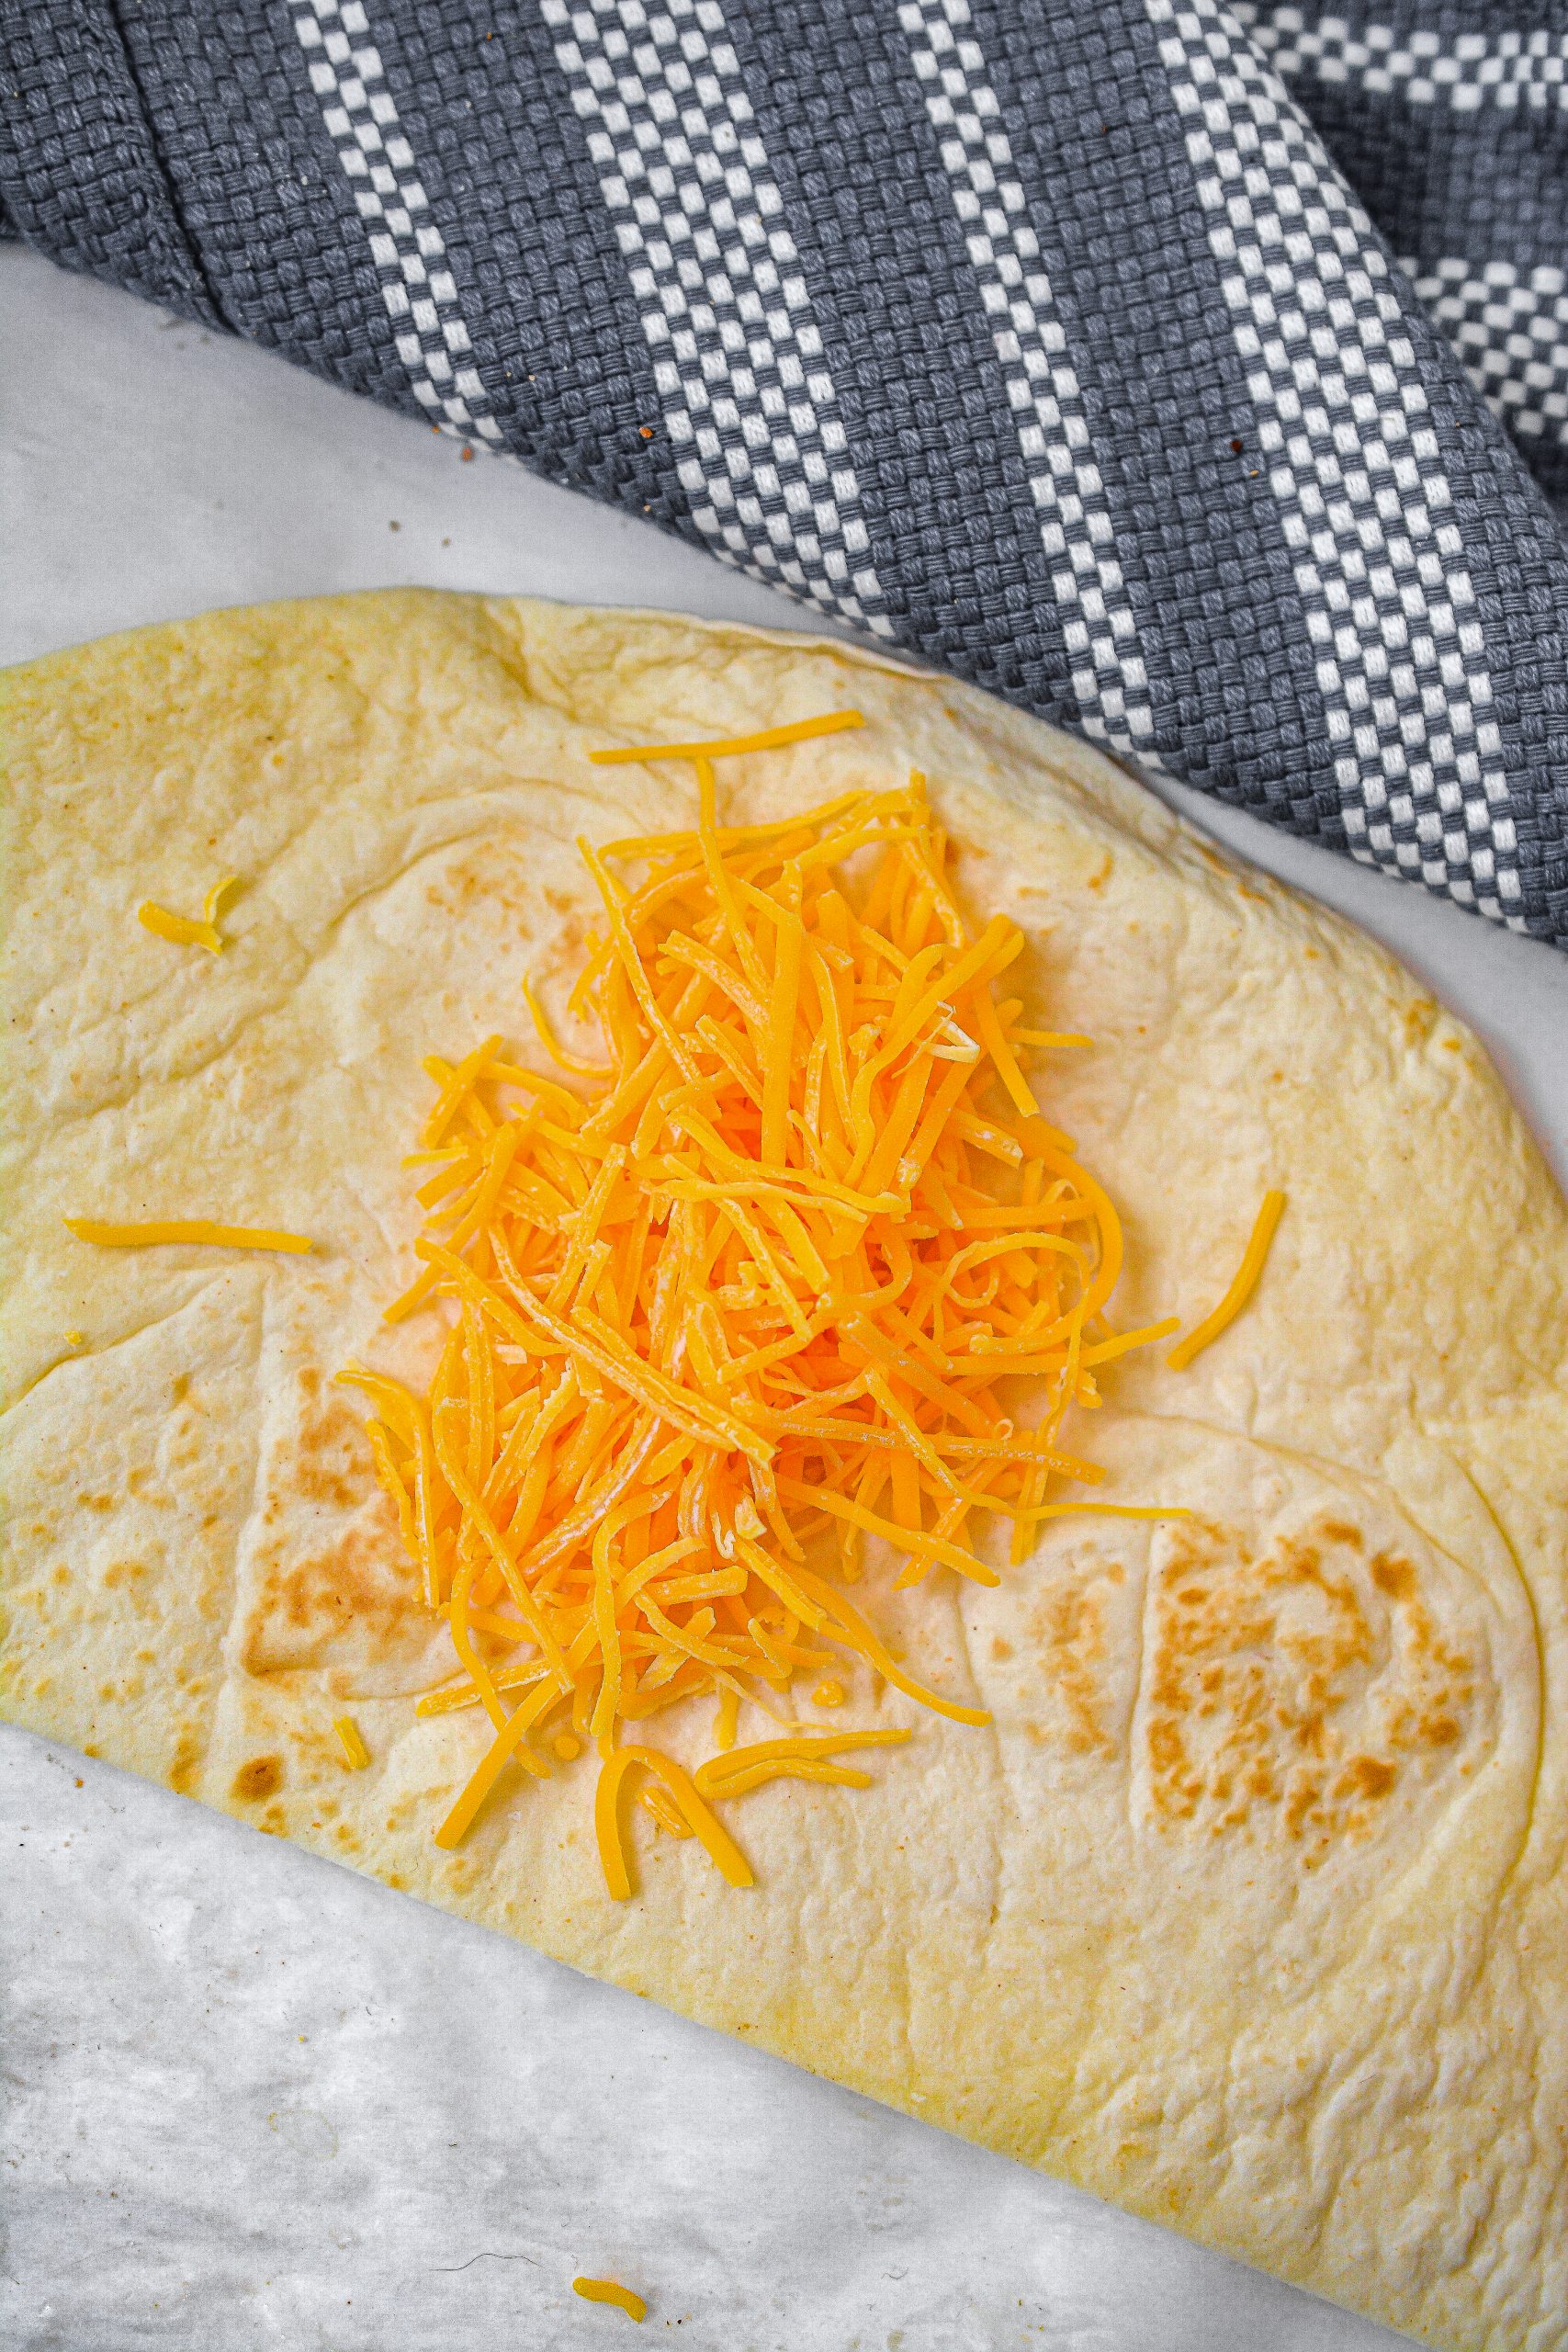 Place a small amount of cheddar cheese in the center of each half of the tortilla and top with a tablespoon or two of the filling.